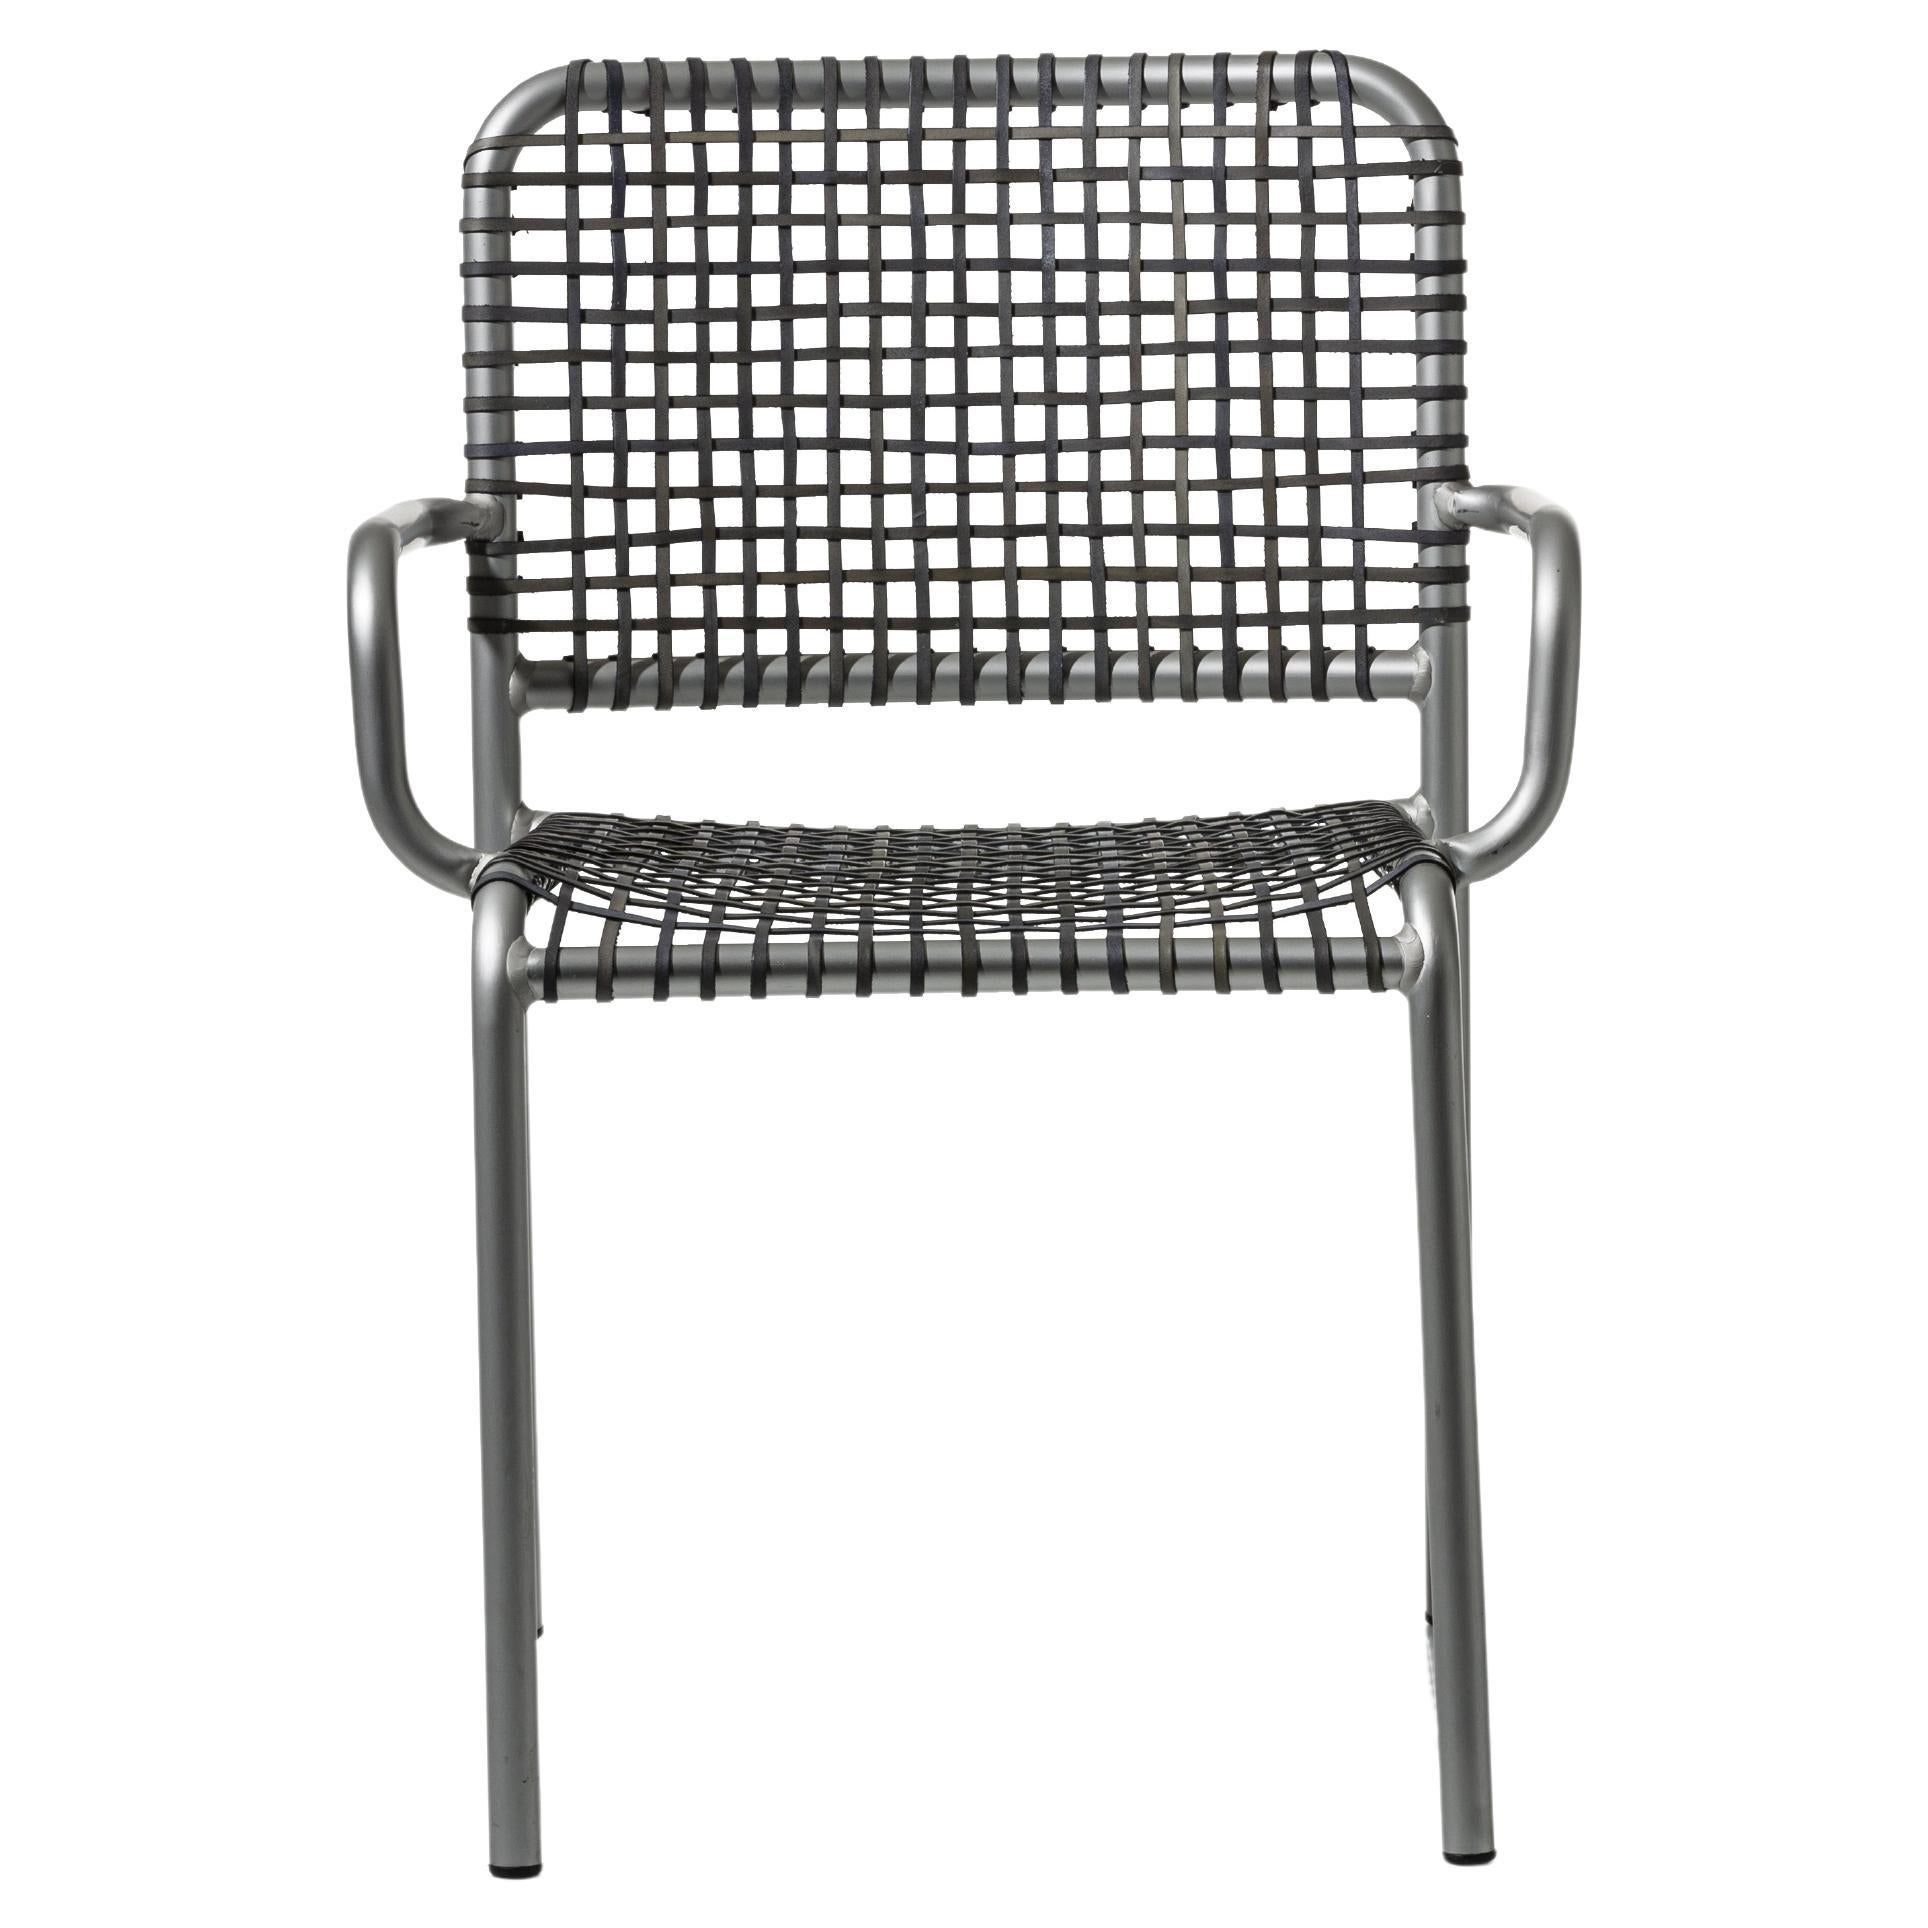 Gervasoni Allu 224 I Armchair in Aluminium Frame and Woven with Grey Rawhide For Sale